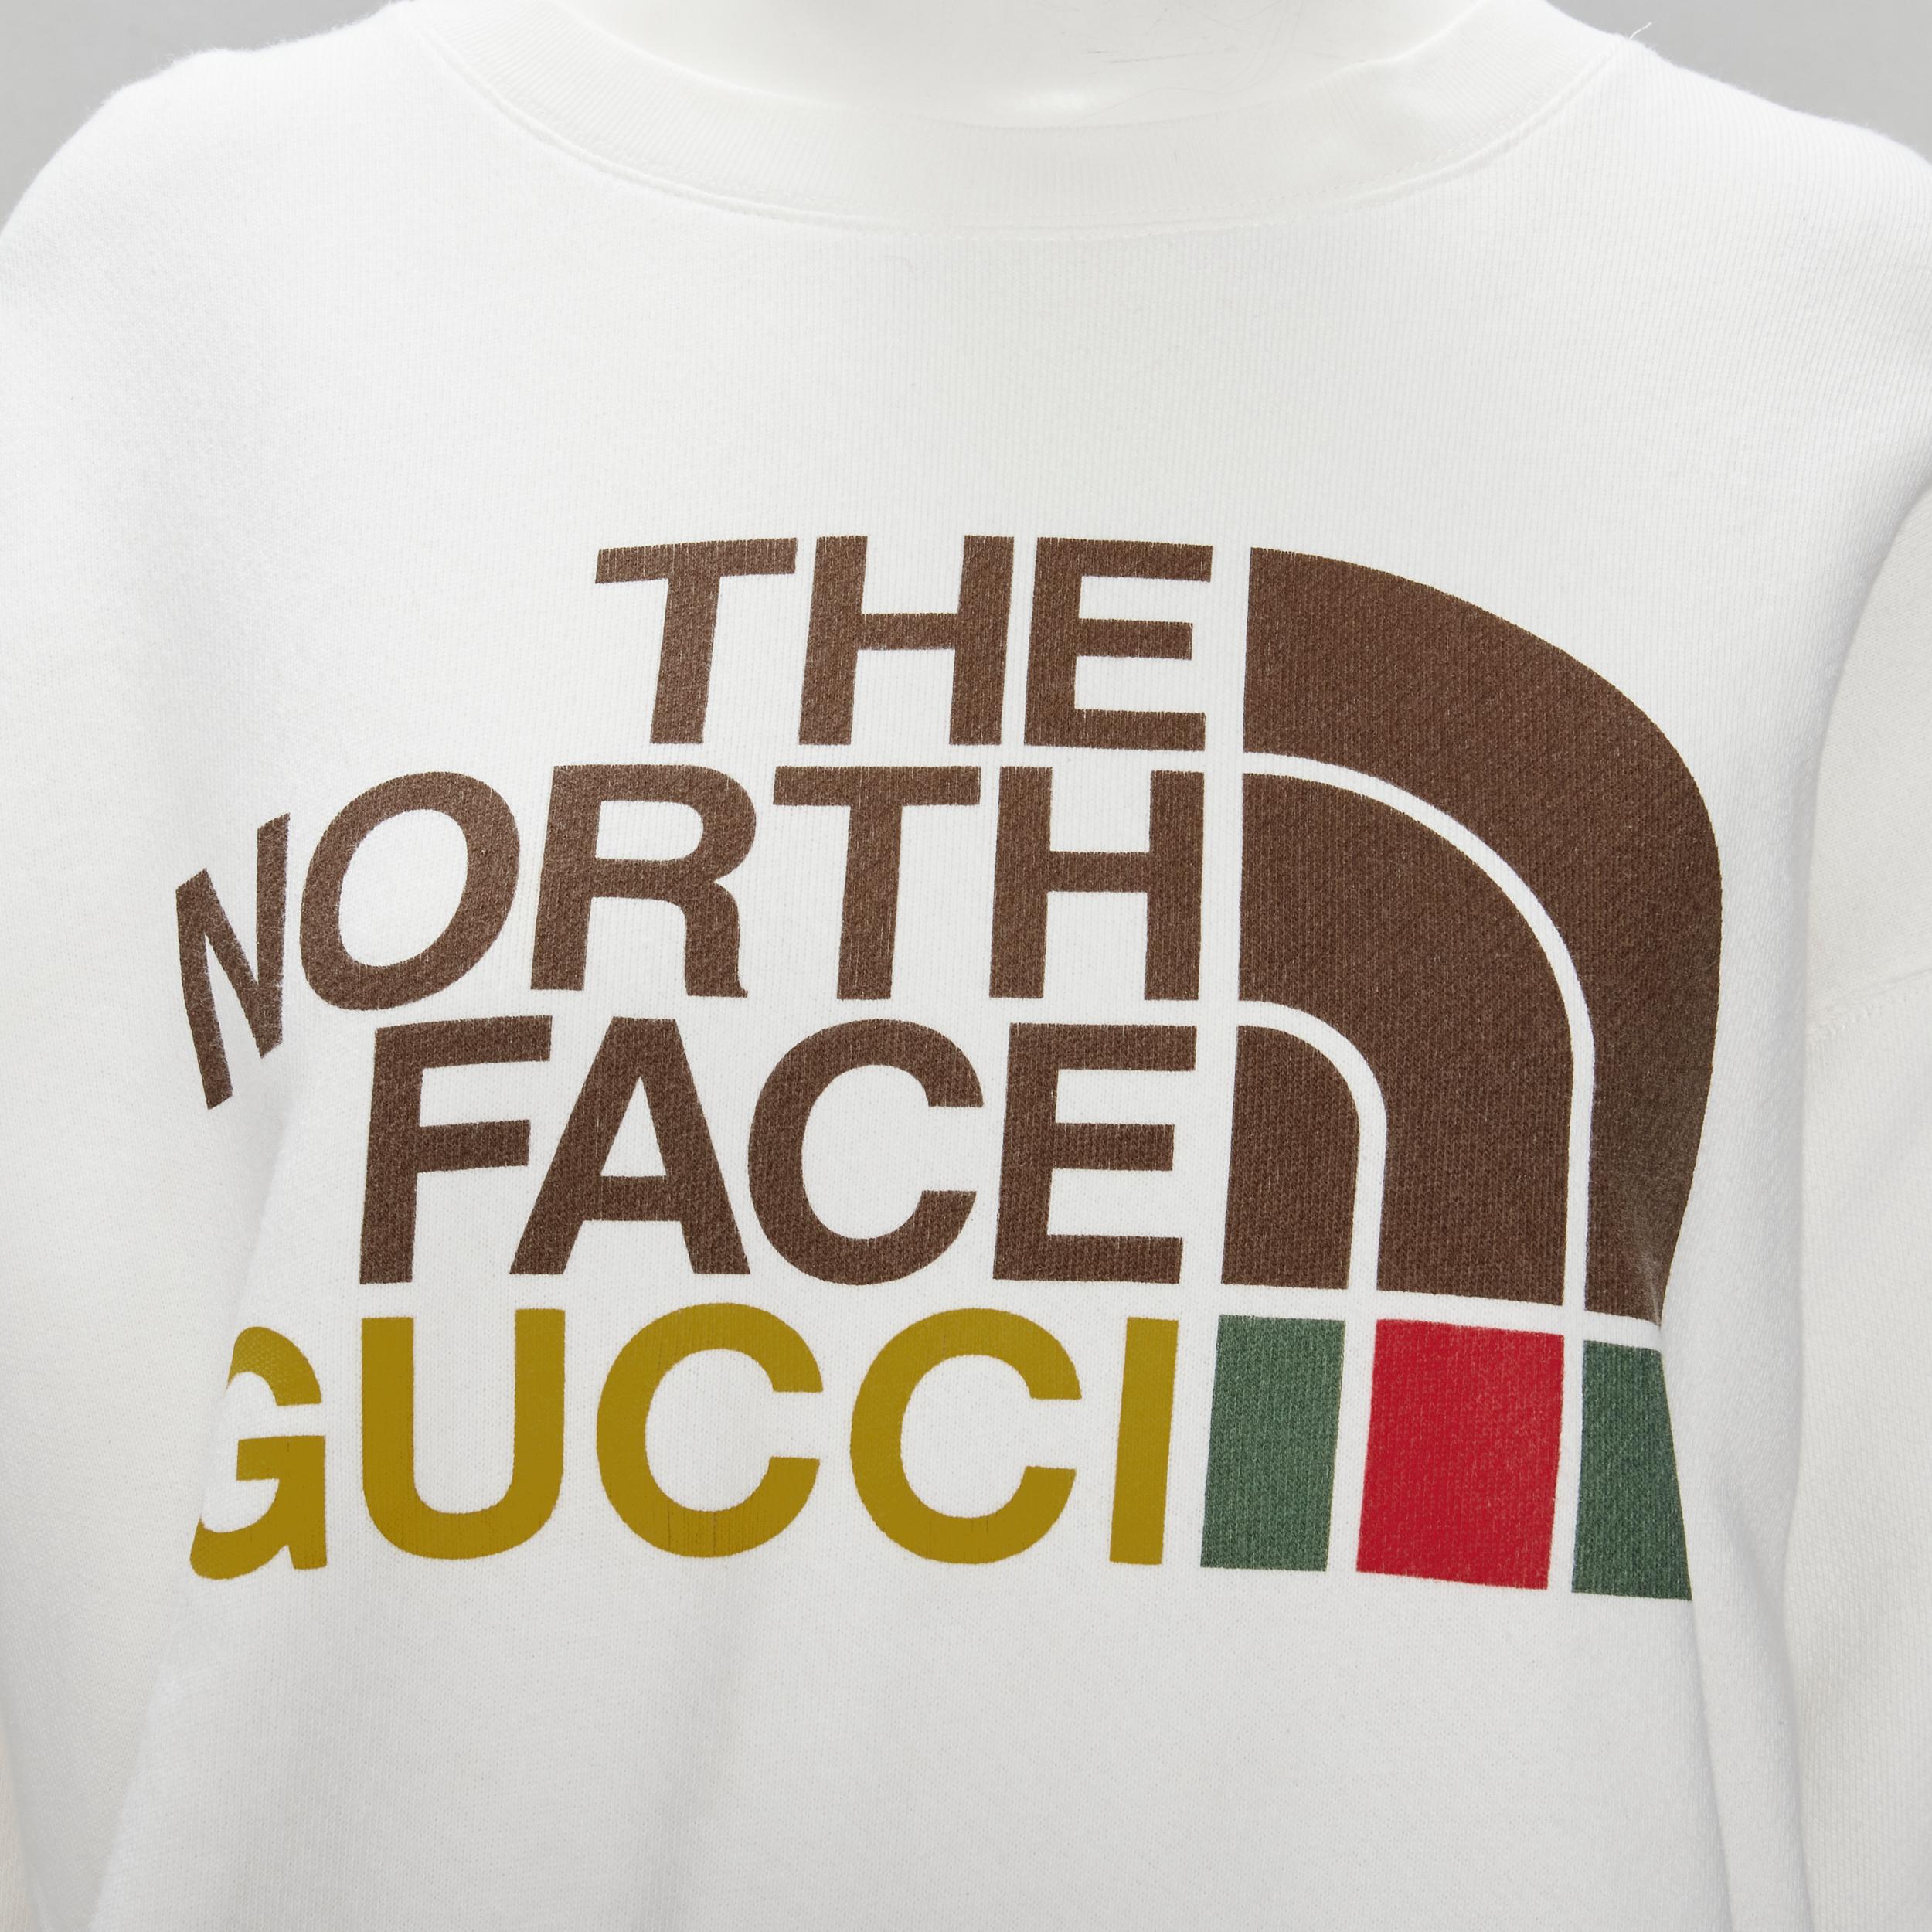 GUCCI THE NORTH FACE logo print white cotton oversized sweatshirt pullover XS
Brand: Gucci
Collection: The North Face 
Material: Cotton
Color: White
Pattern: Solid
Made in: Italy

CONDITION:
Condition: Excellent, this item was pre-owned and is in